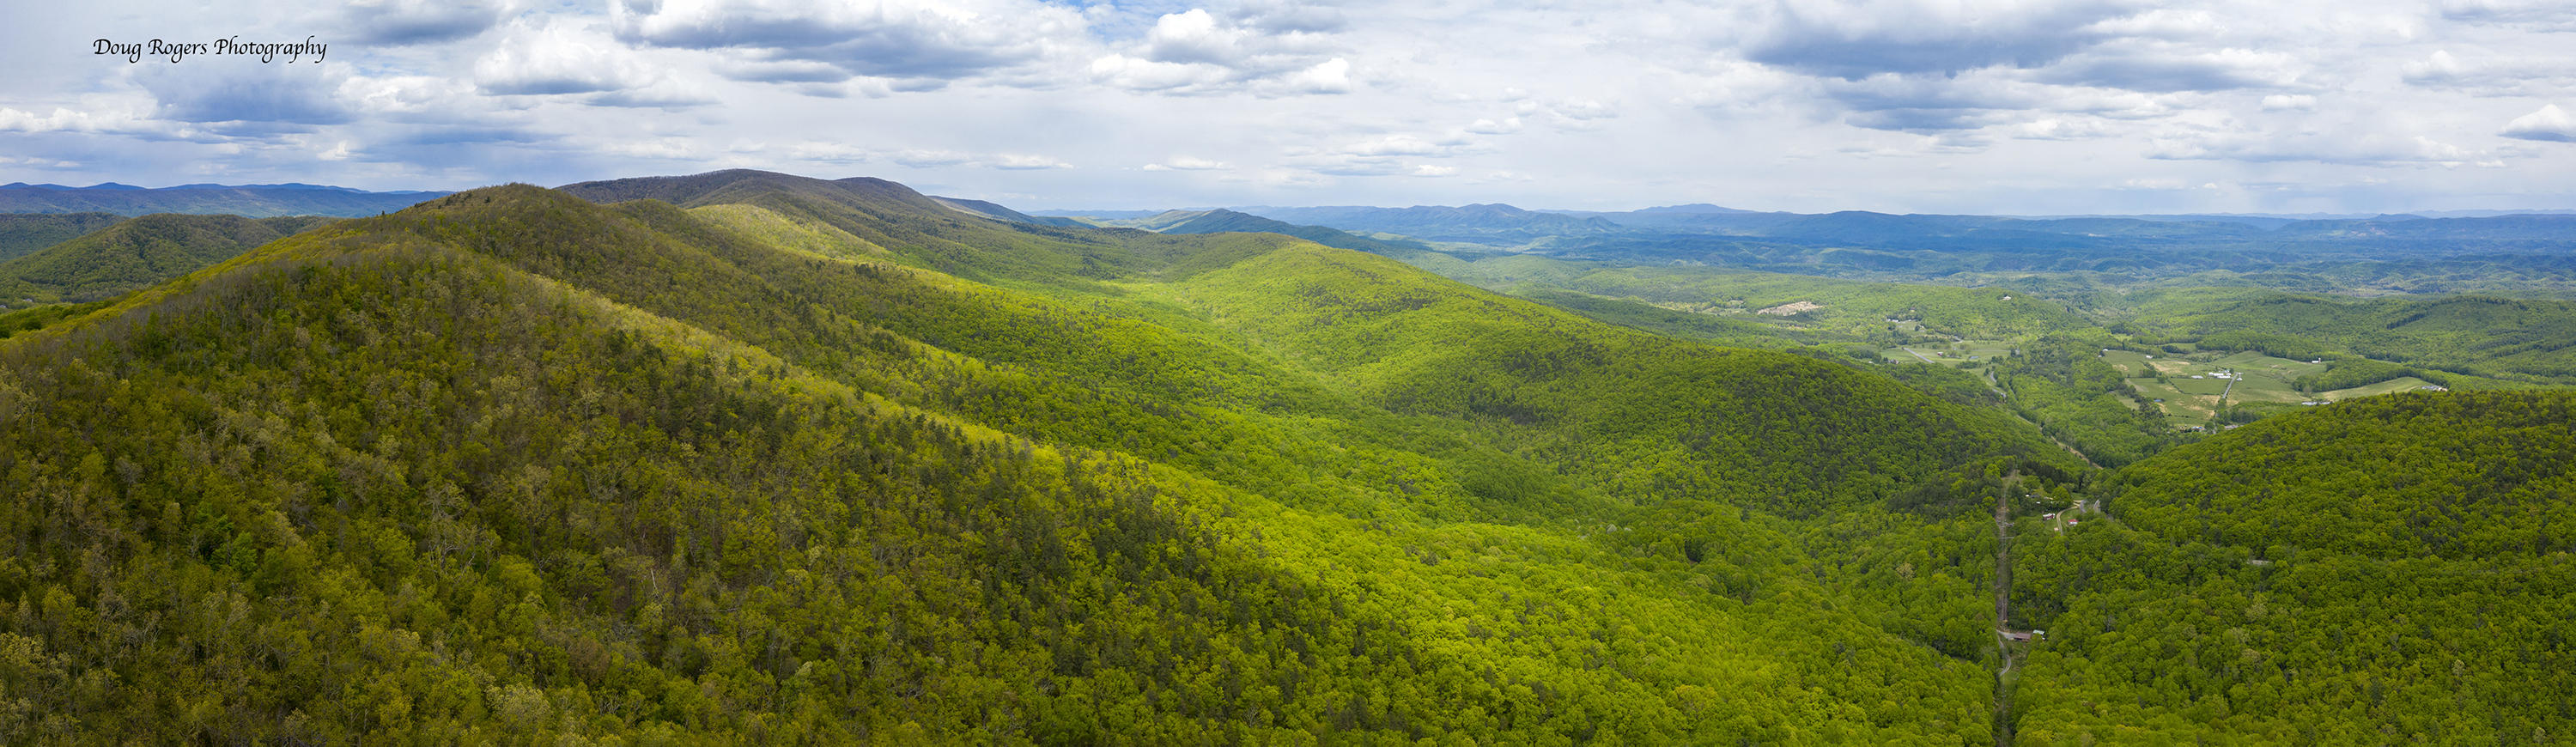 Drone view looking out over rolling mountain ridges and valleys. The mountain sides are thickly forested. Sunlight dapples over the trees. Small clearings and farms are visible in the distance.